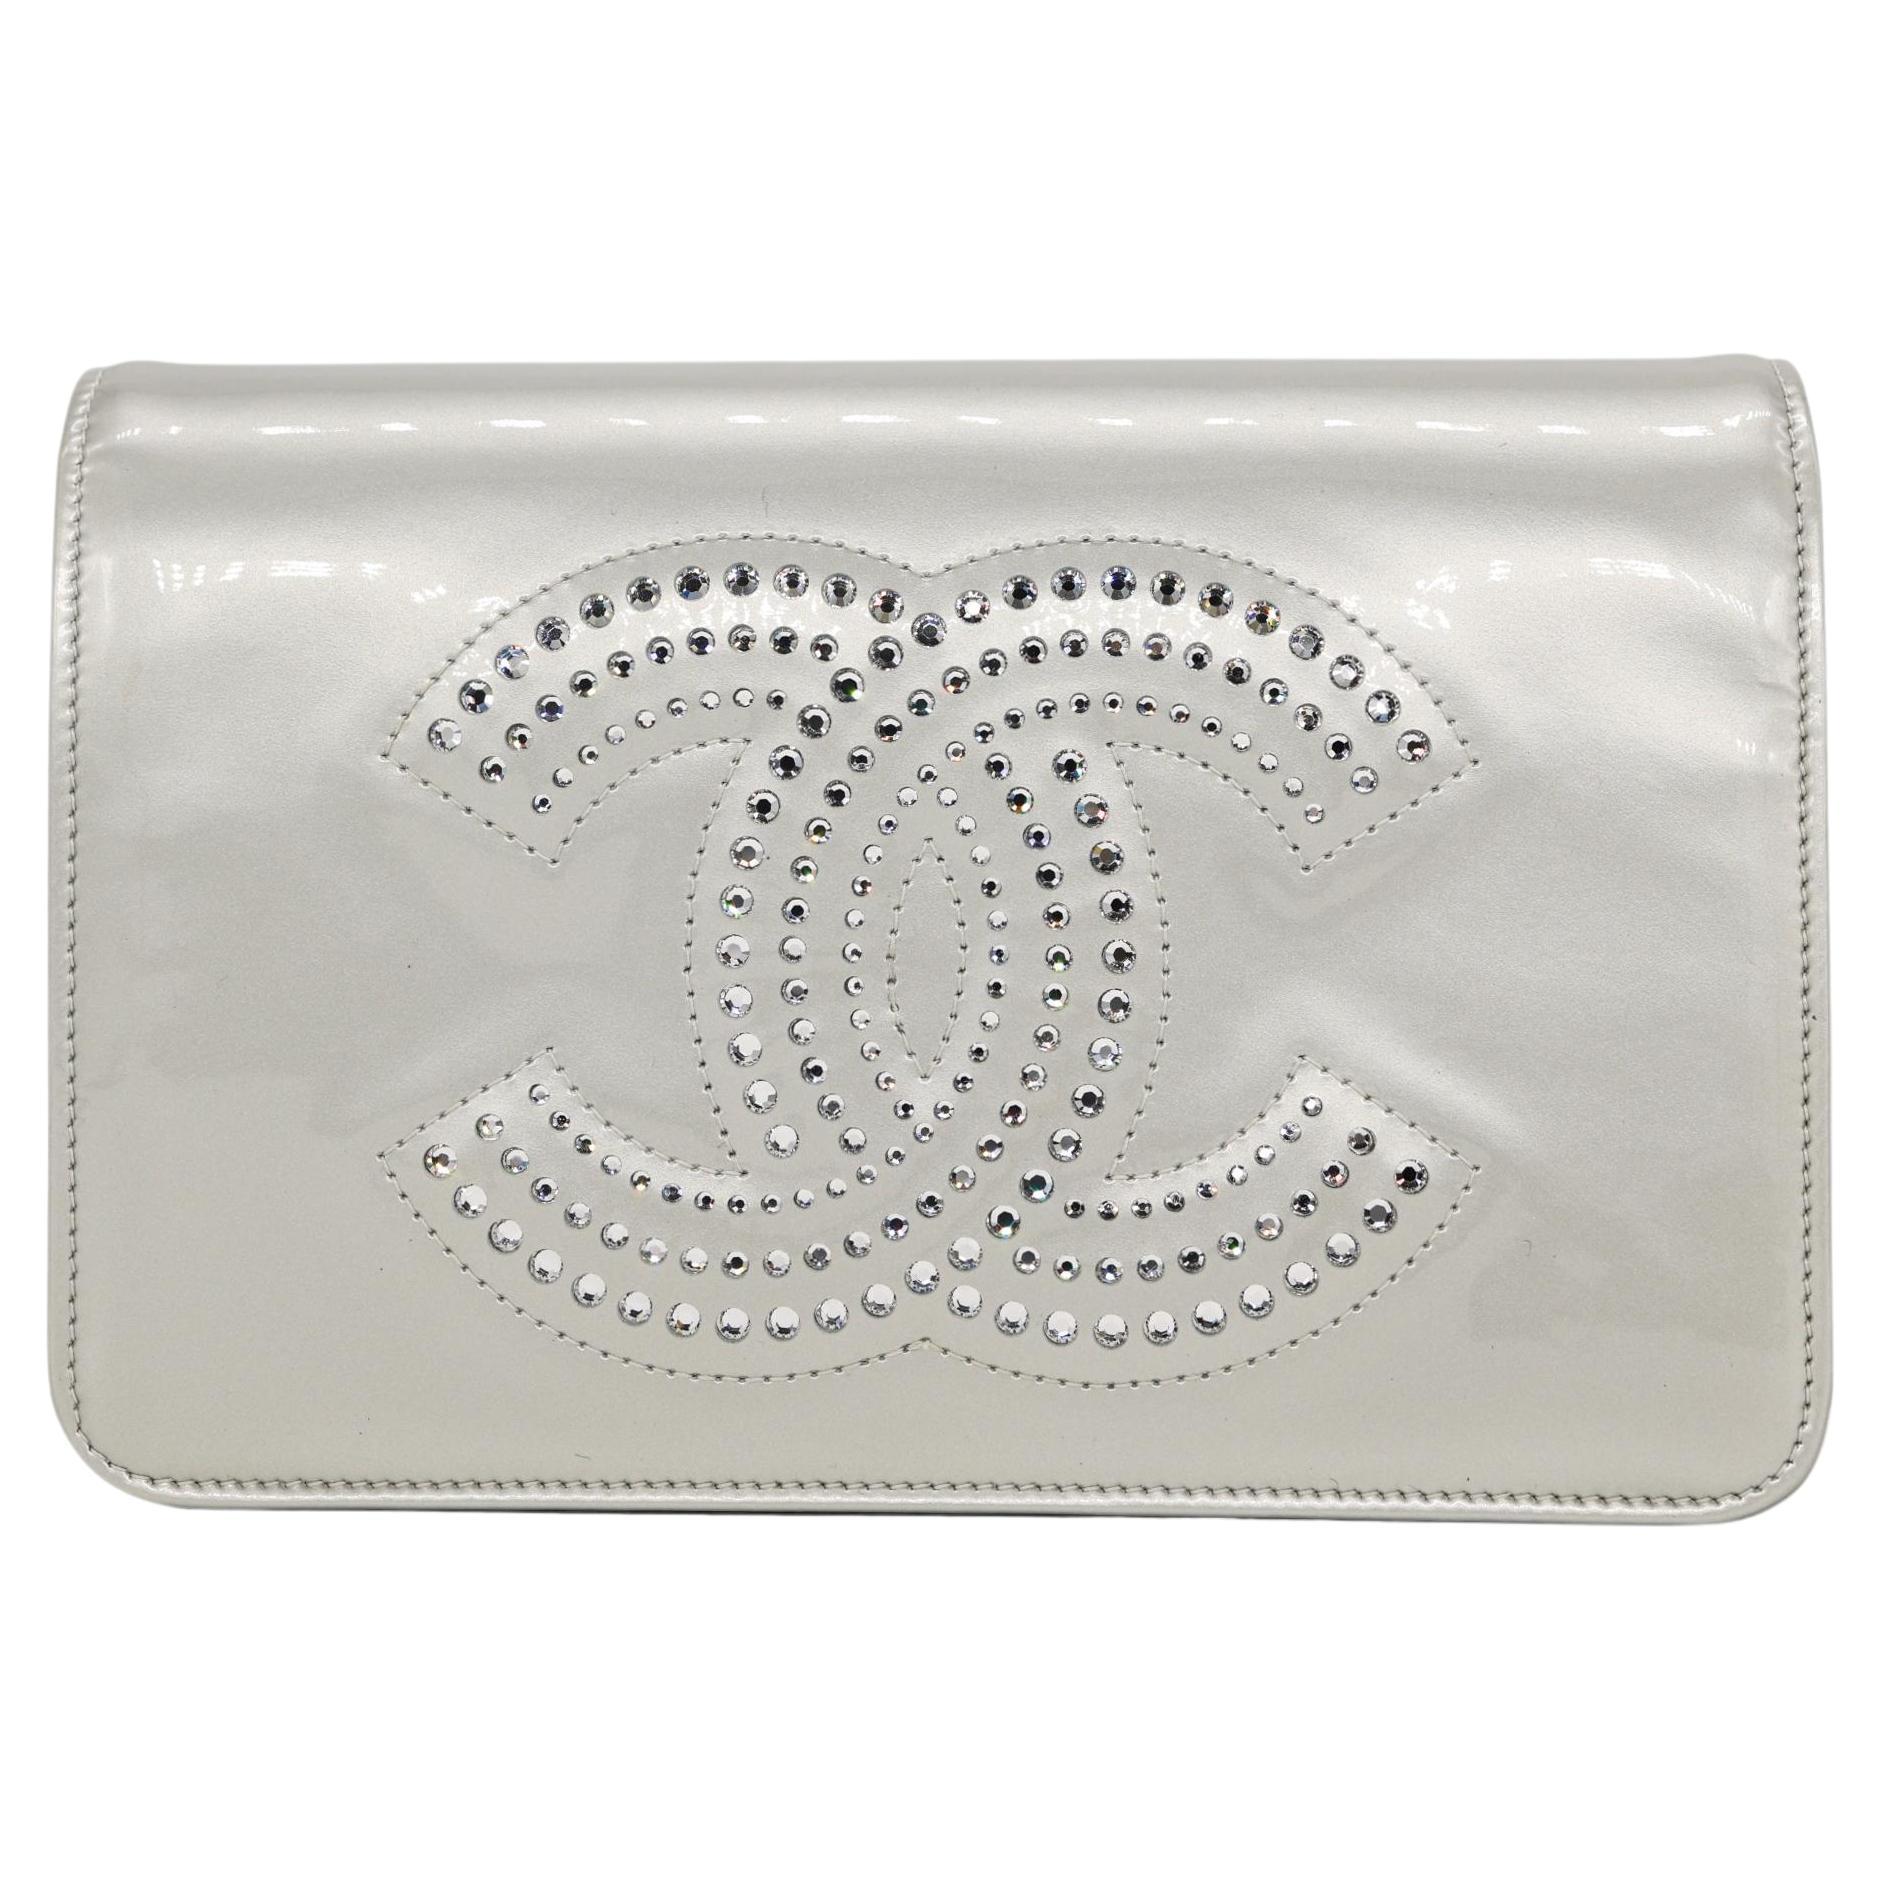 Chanel Silver Patent Leather Strass Wallet on Chain Clutch Crossbody Bag, 2009.